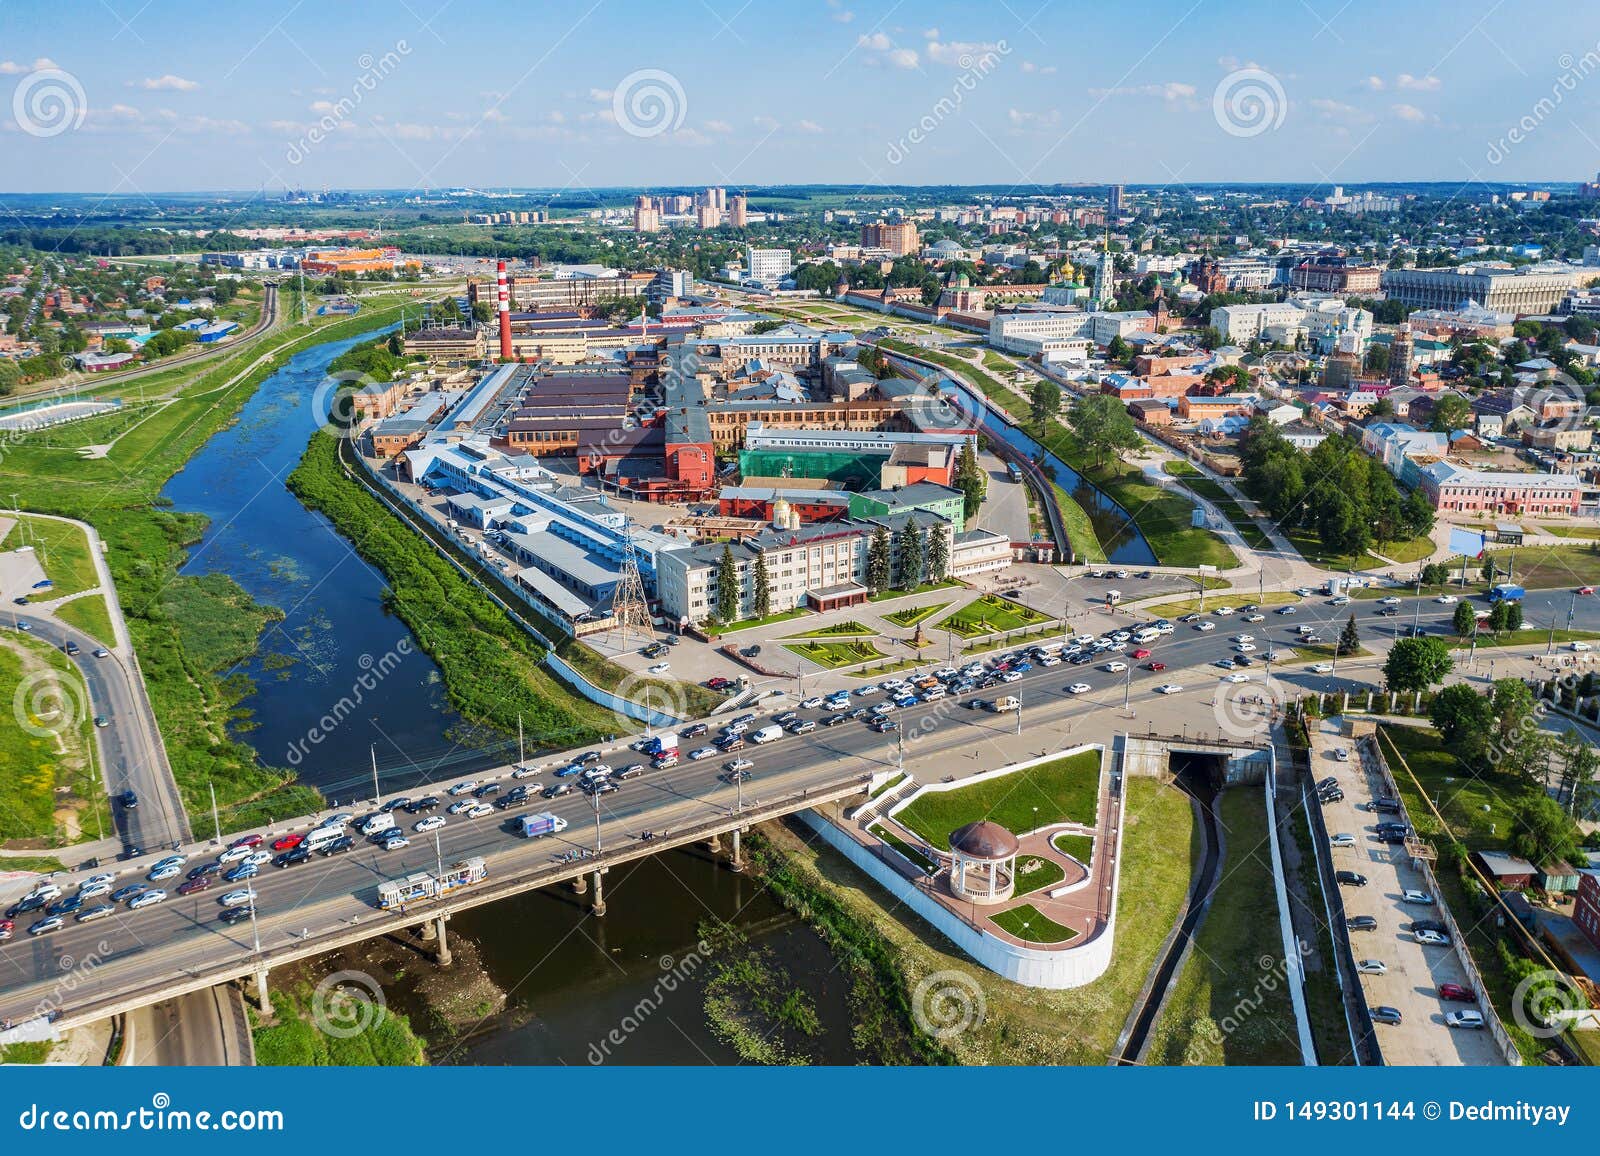 aerial view of tula city center or downtown with bridge over river upa, modern and historic buildings, factories and car traffic